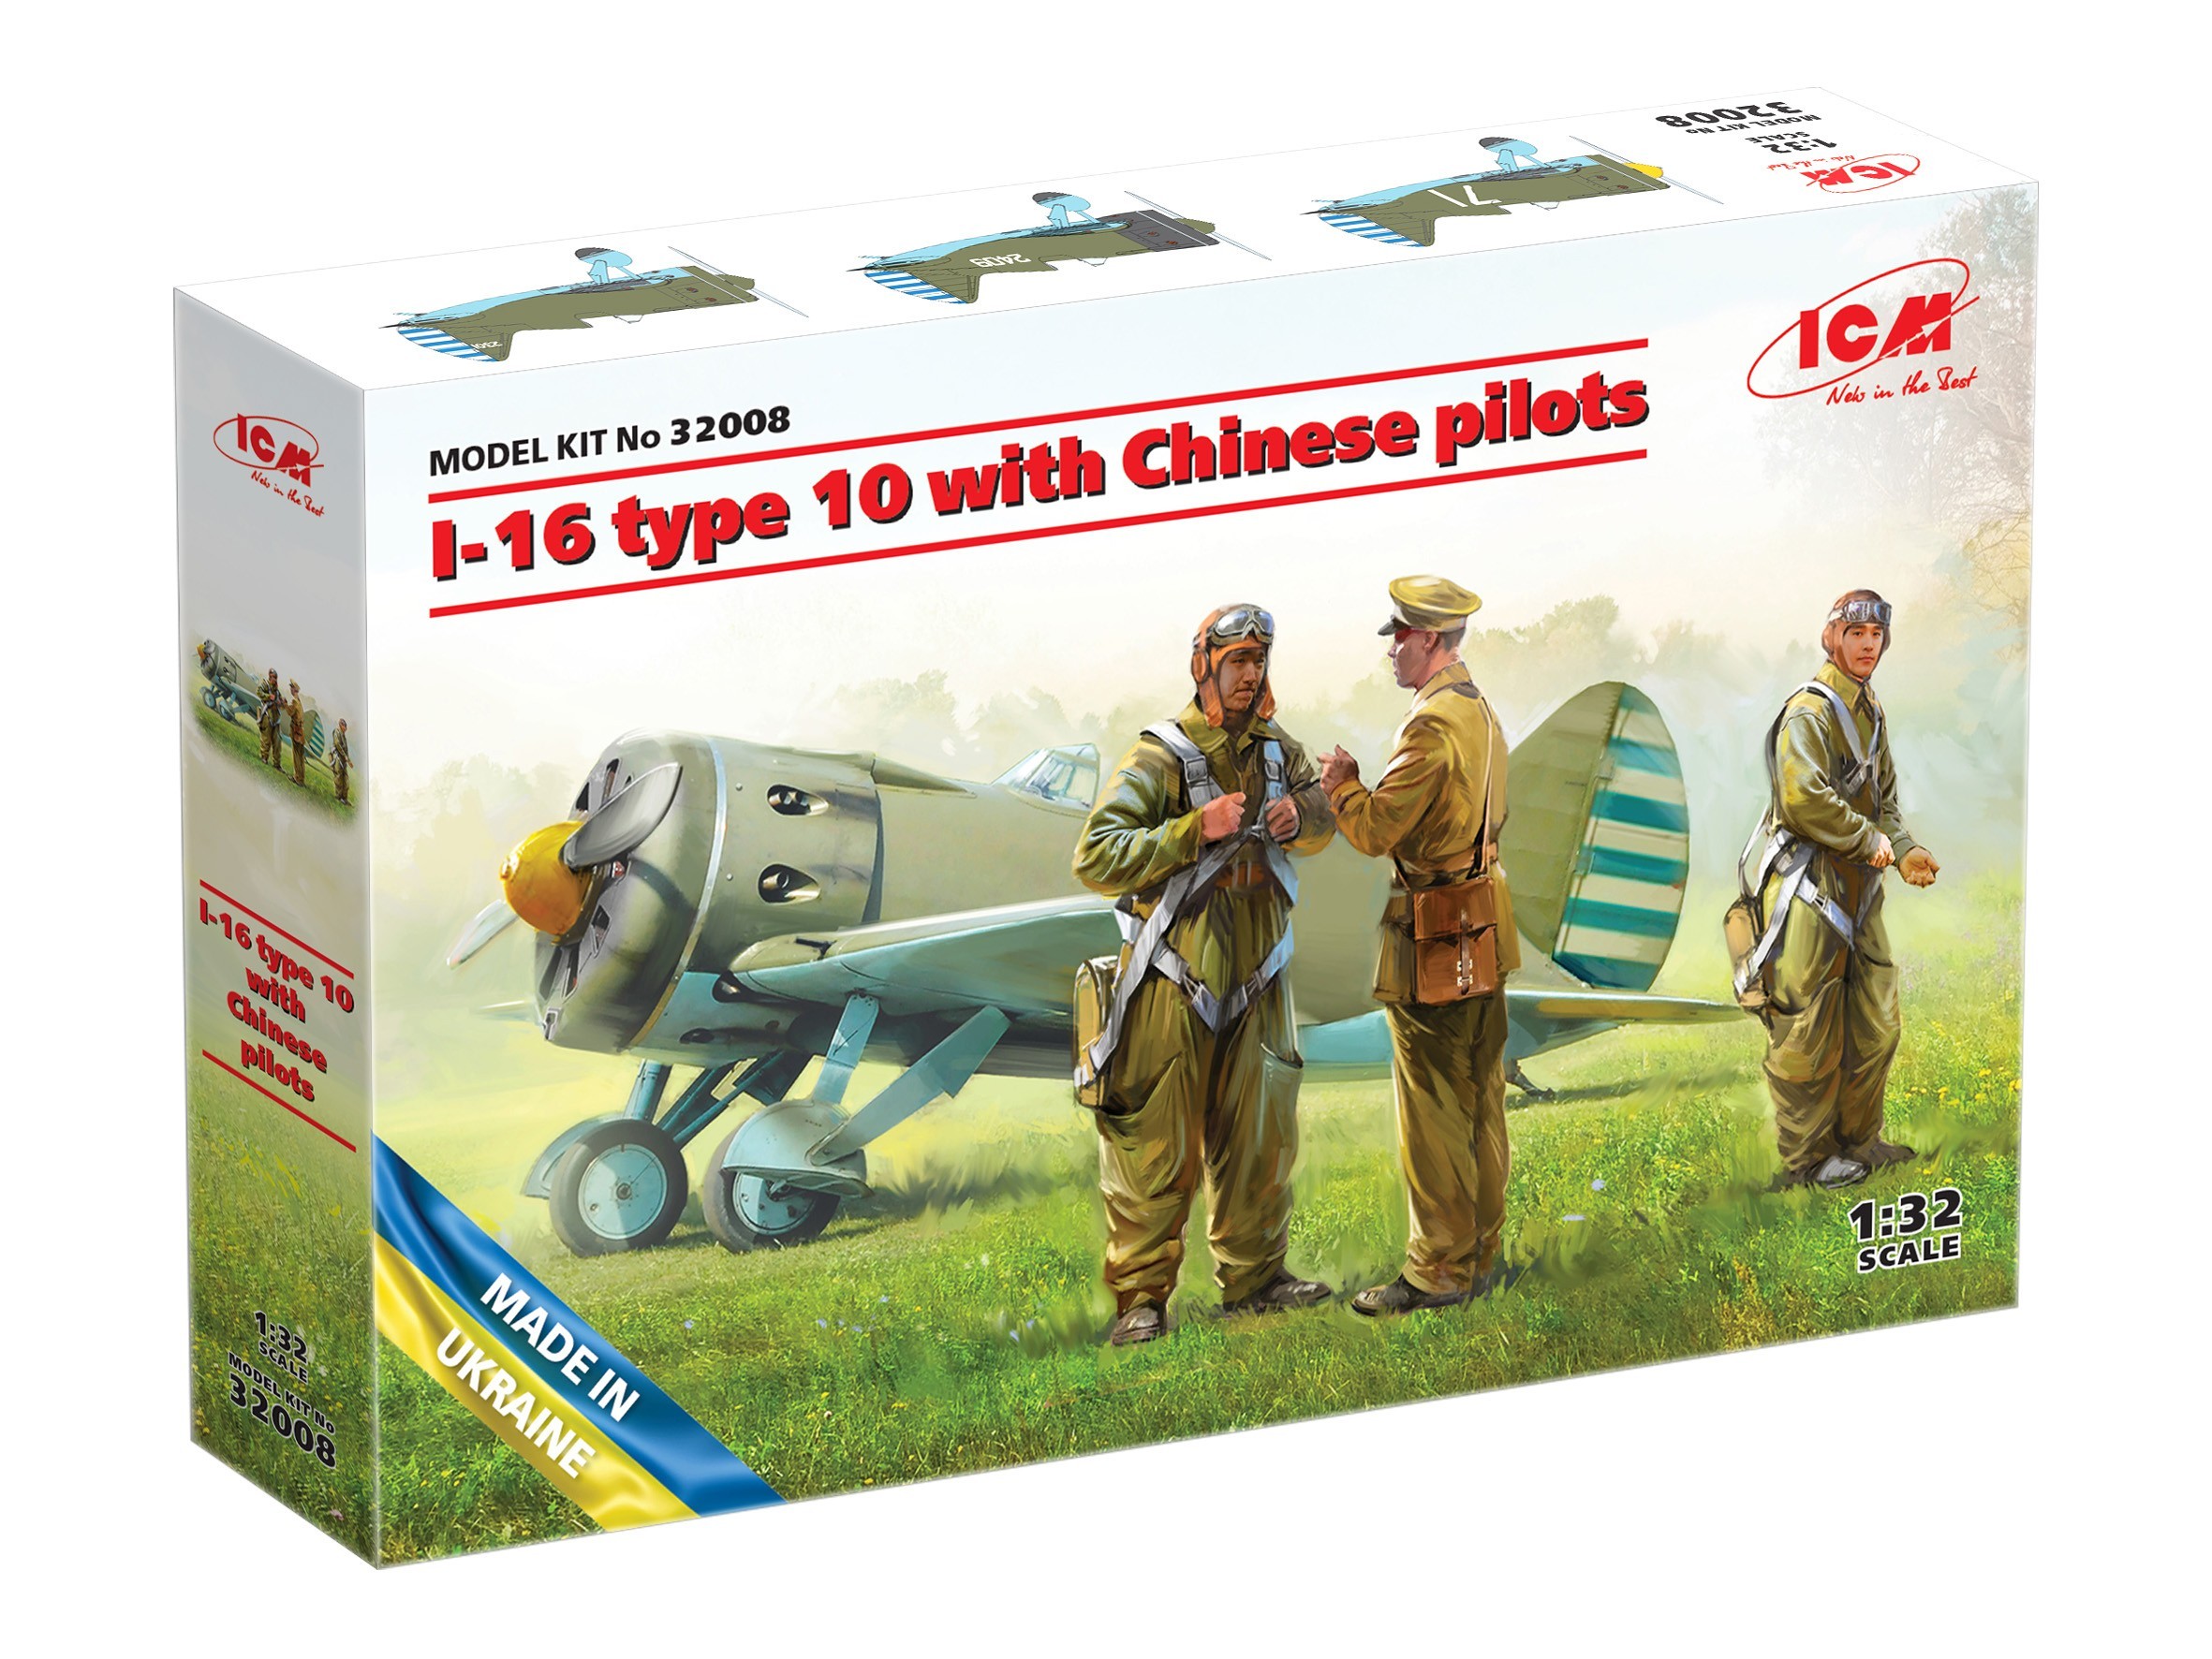 32008 - I-16 type 10 with Chinese pilots - 1:32